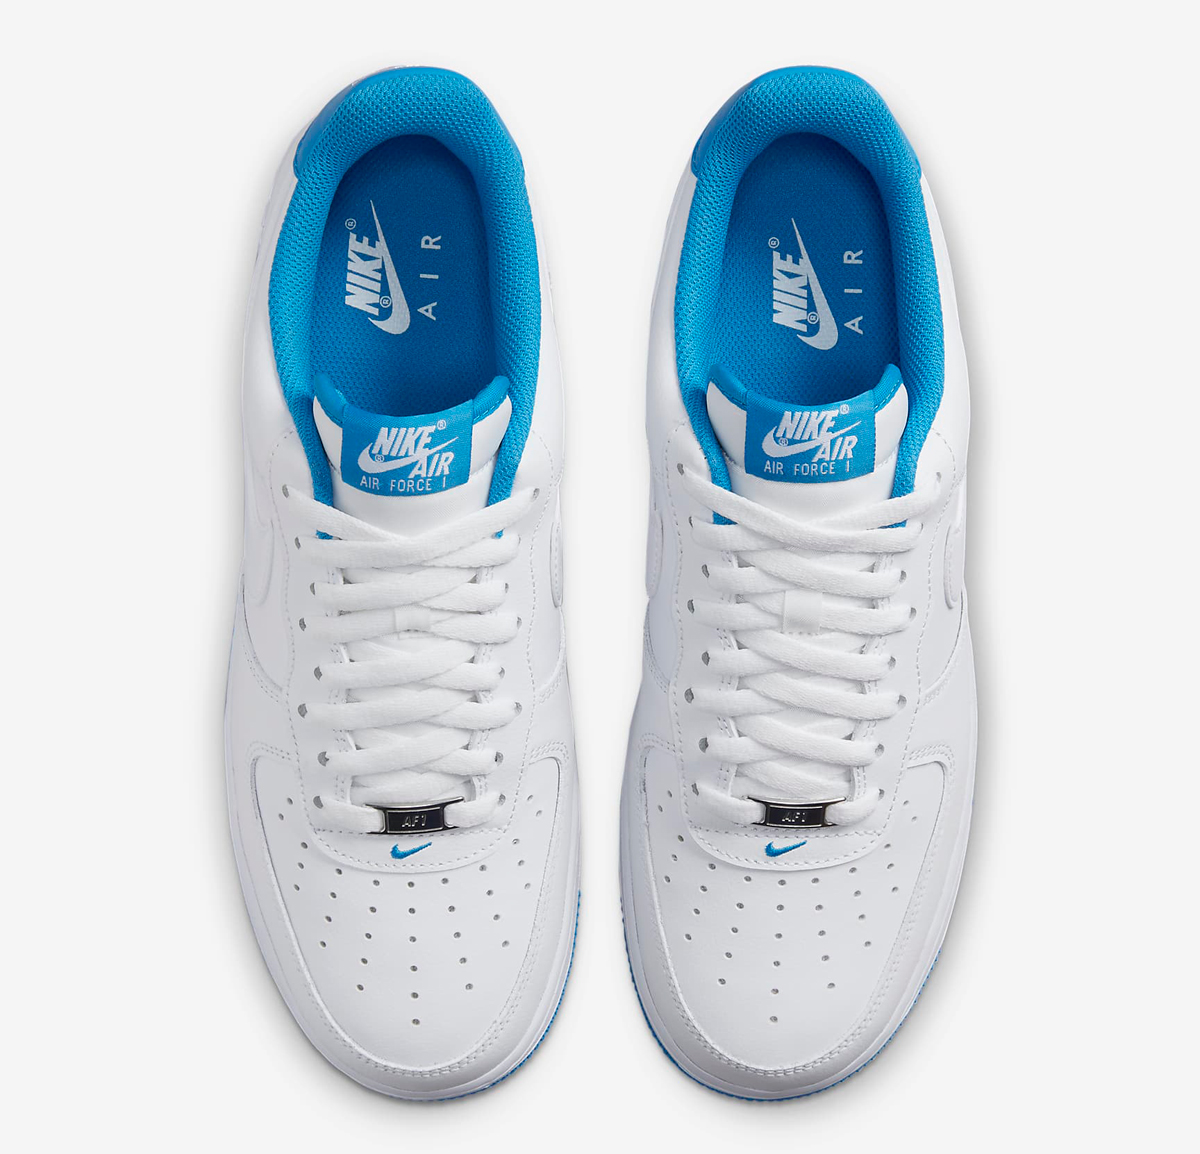 nike-air-force-1-low-white-light-photo-blue-4